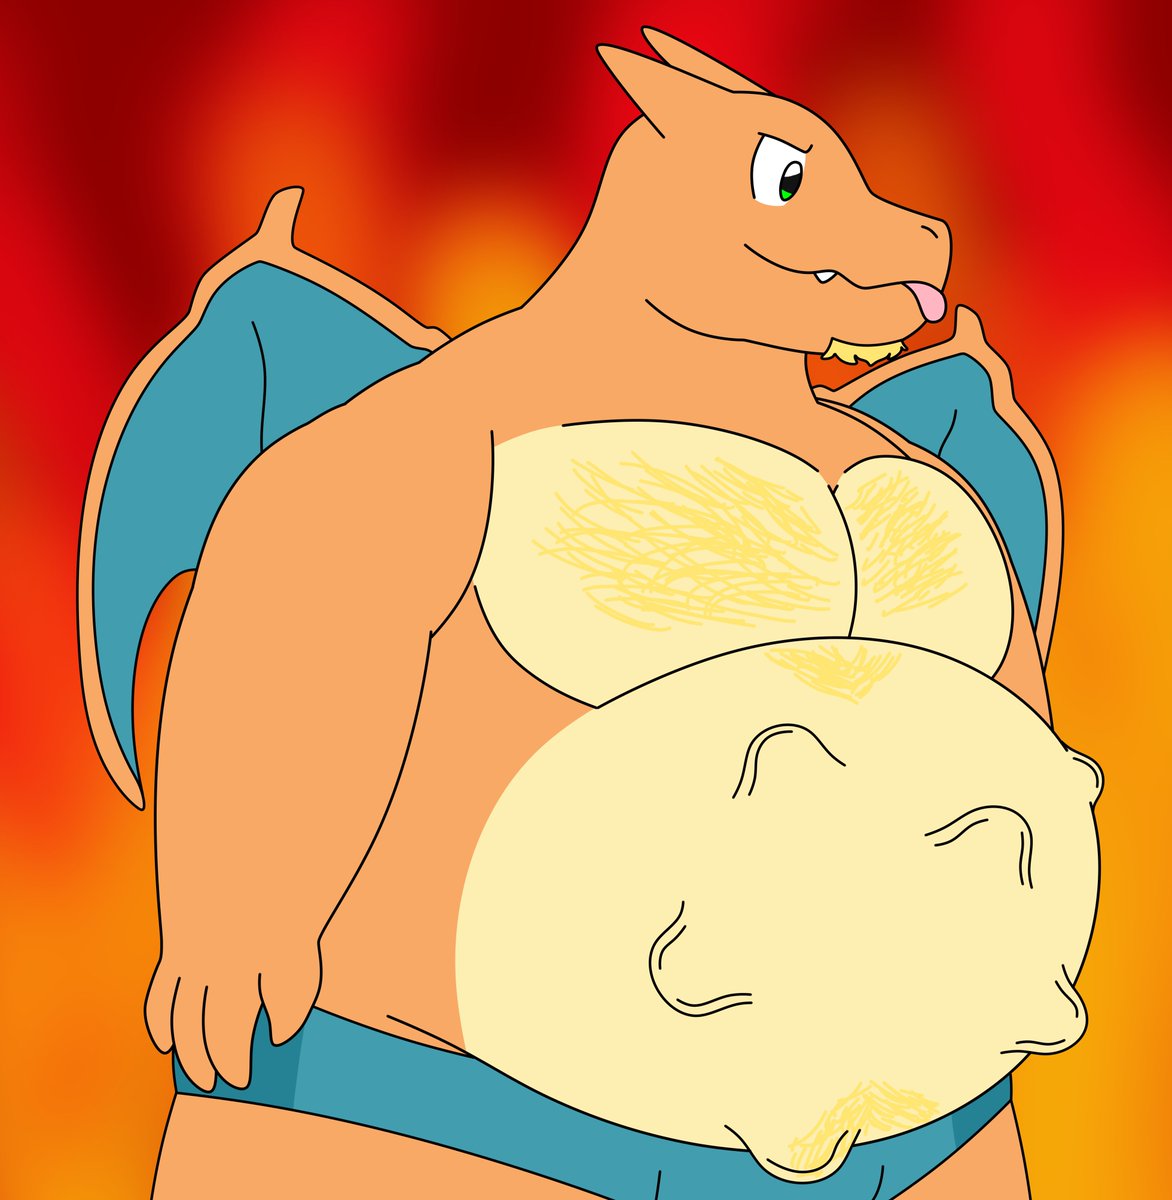 I drew myself as a Charizard
And of course the predish mood didn't go away xd

#Charizard #Draw #Vore #Furry #Pokemon